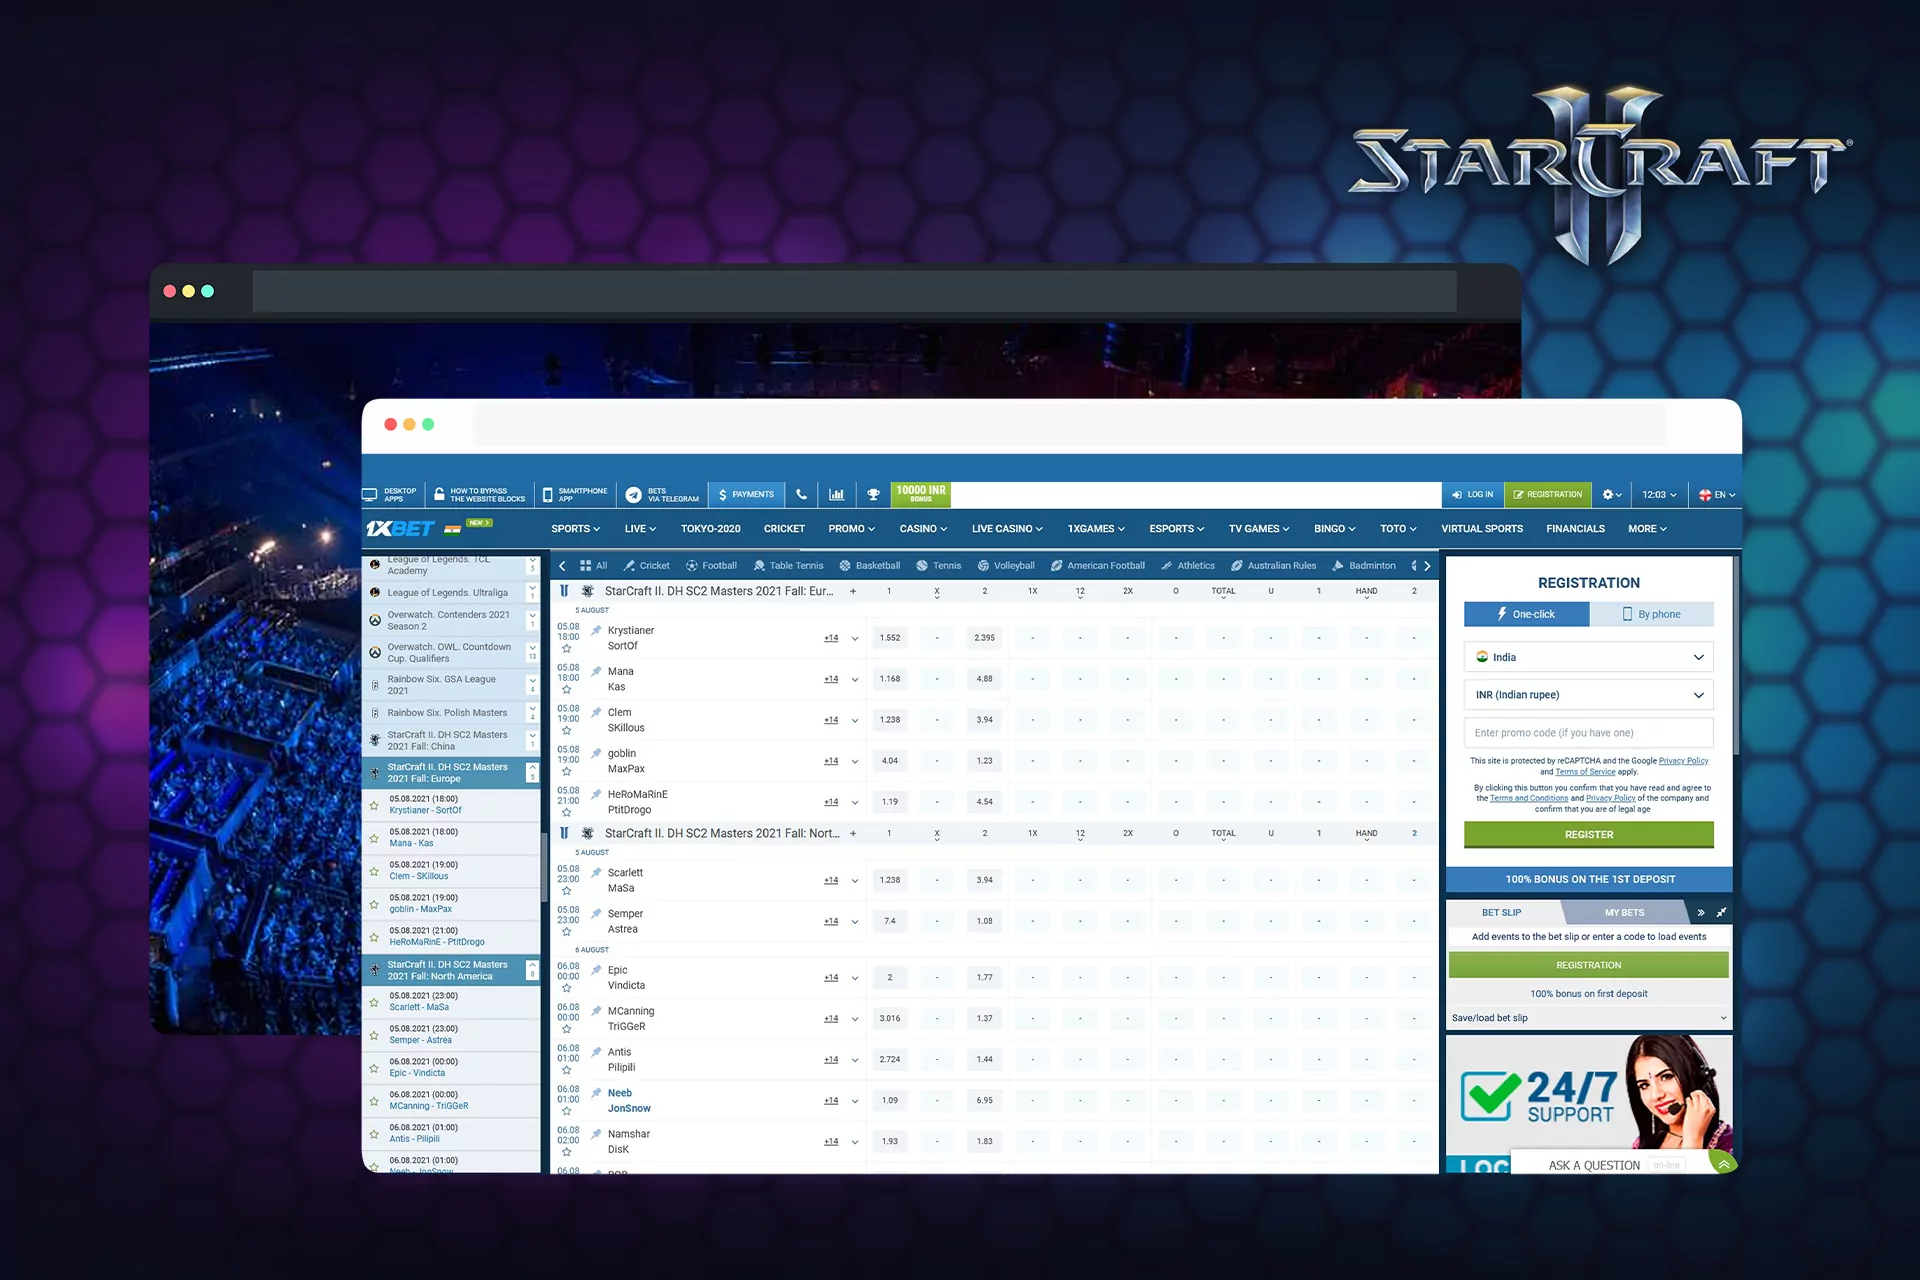 Open the 'Esports' section and find Starcraft II in the list of games.